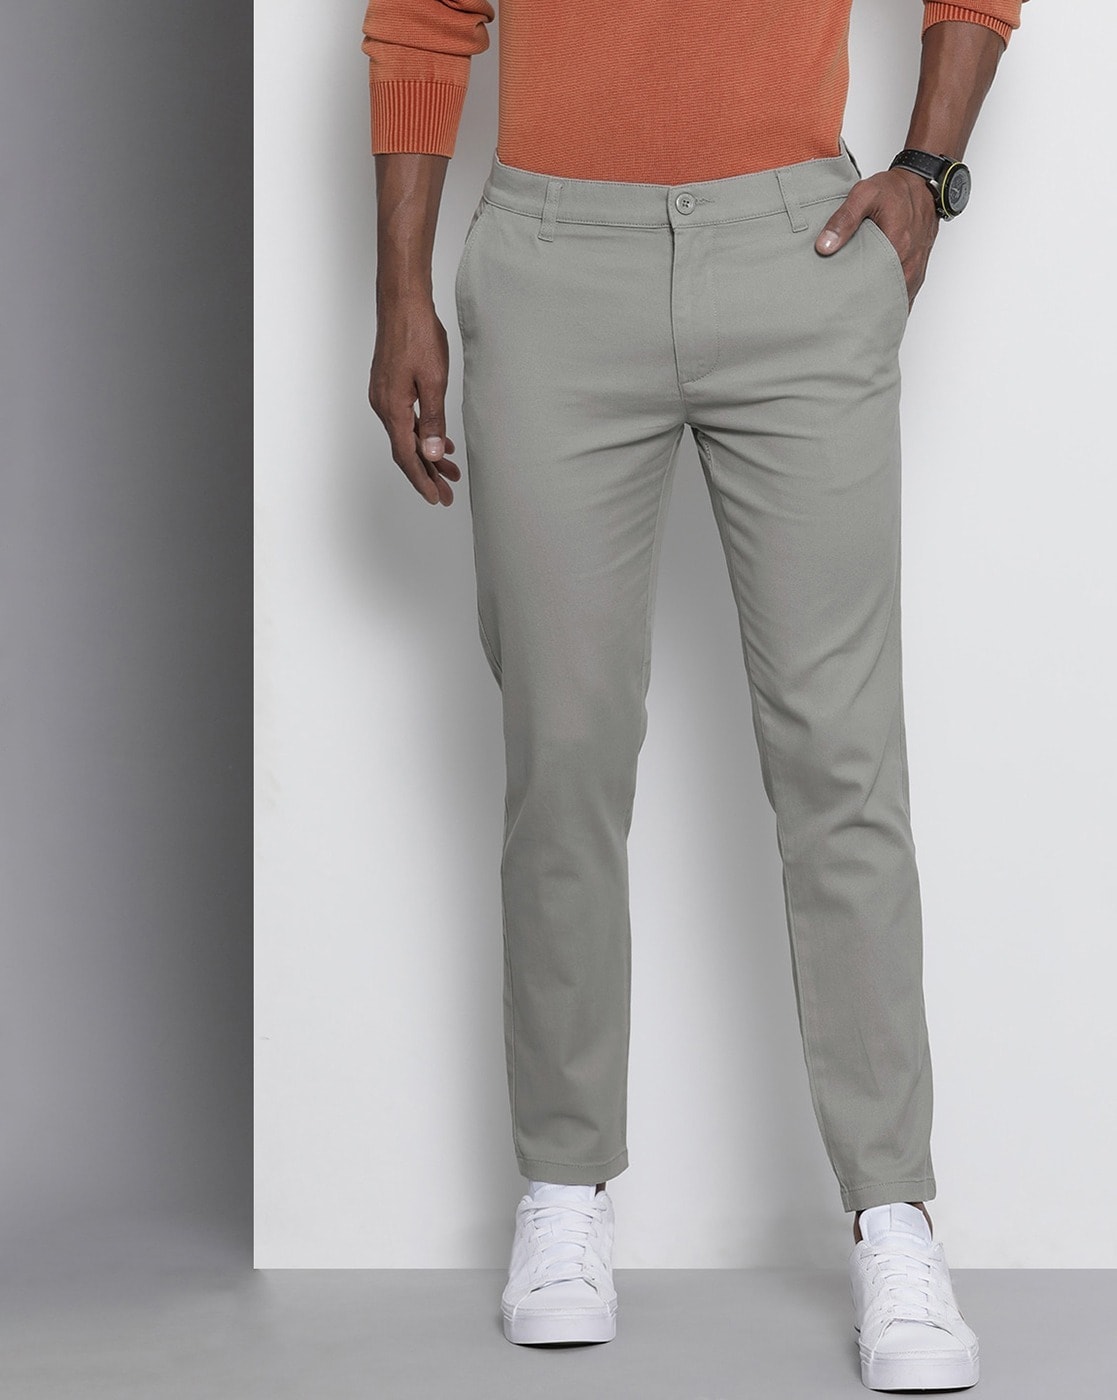 Buy Grey Trousers & Pants for Men by The Indian Garage Co Online